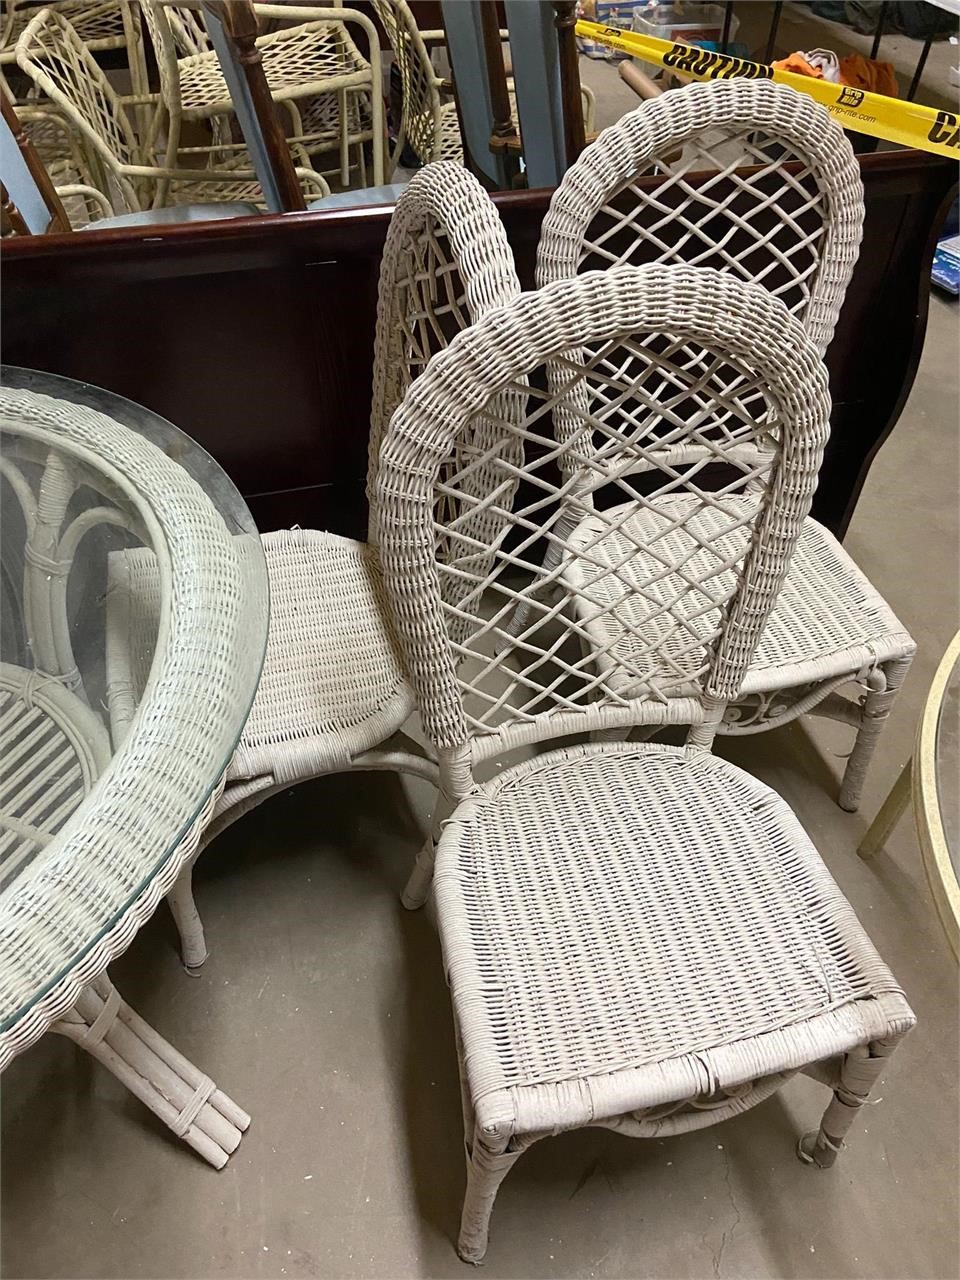 WICKER PATIO TABLE W/ CHAIRS